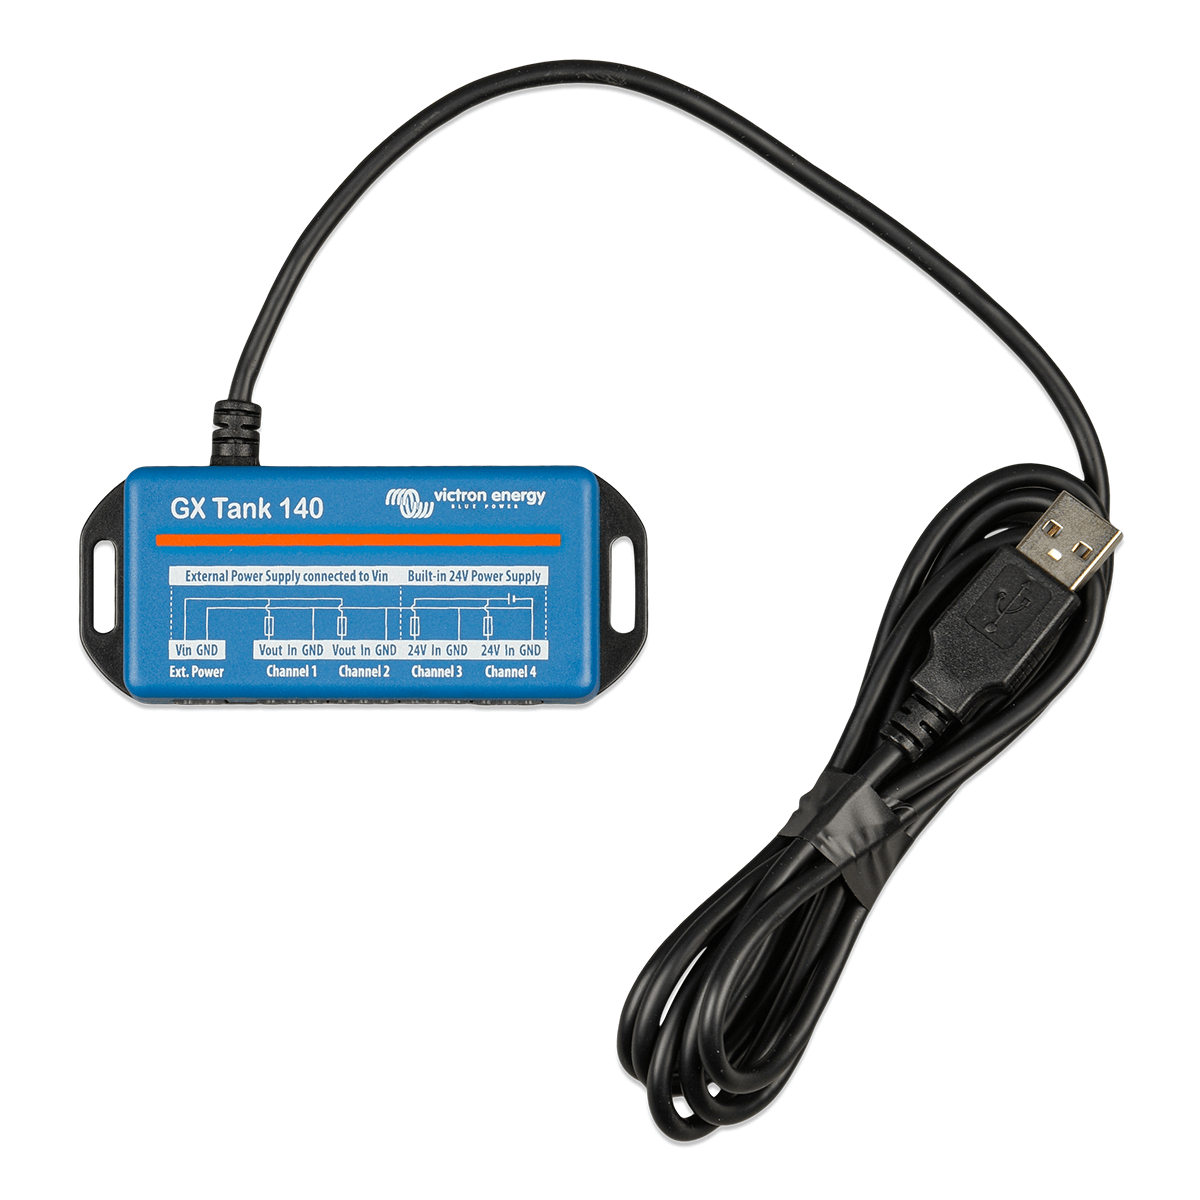 The blue and black Victron GX Tank 140 - Voltage Sensor for Tank Level Monitoring comes with a USB cable attached and features various connection ports and channels.